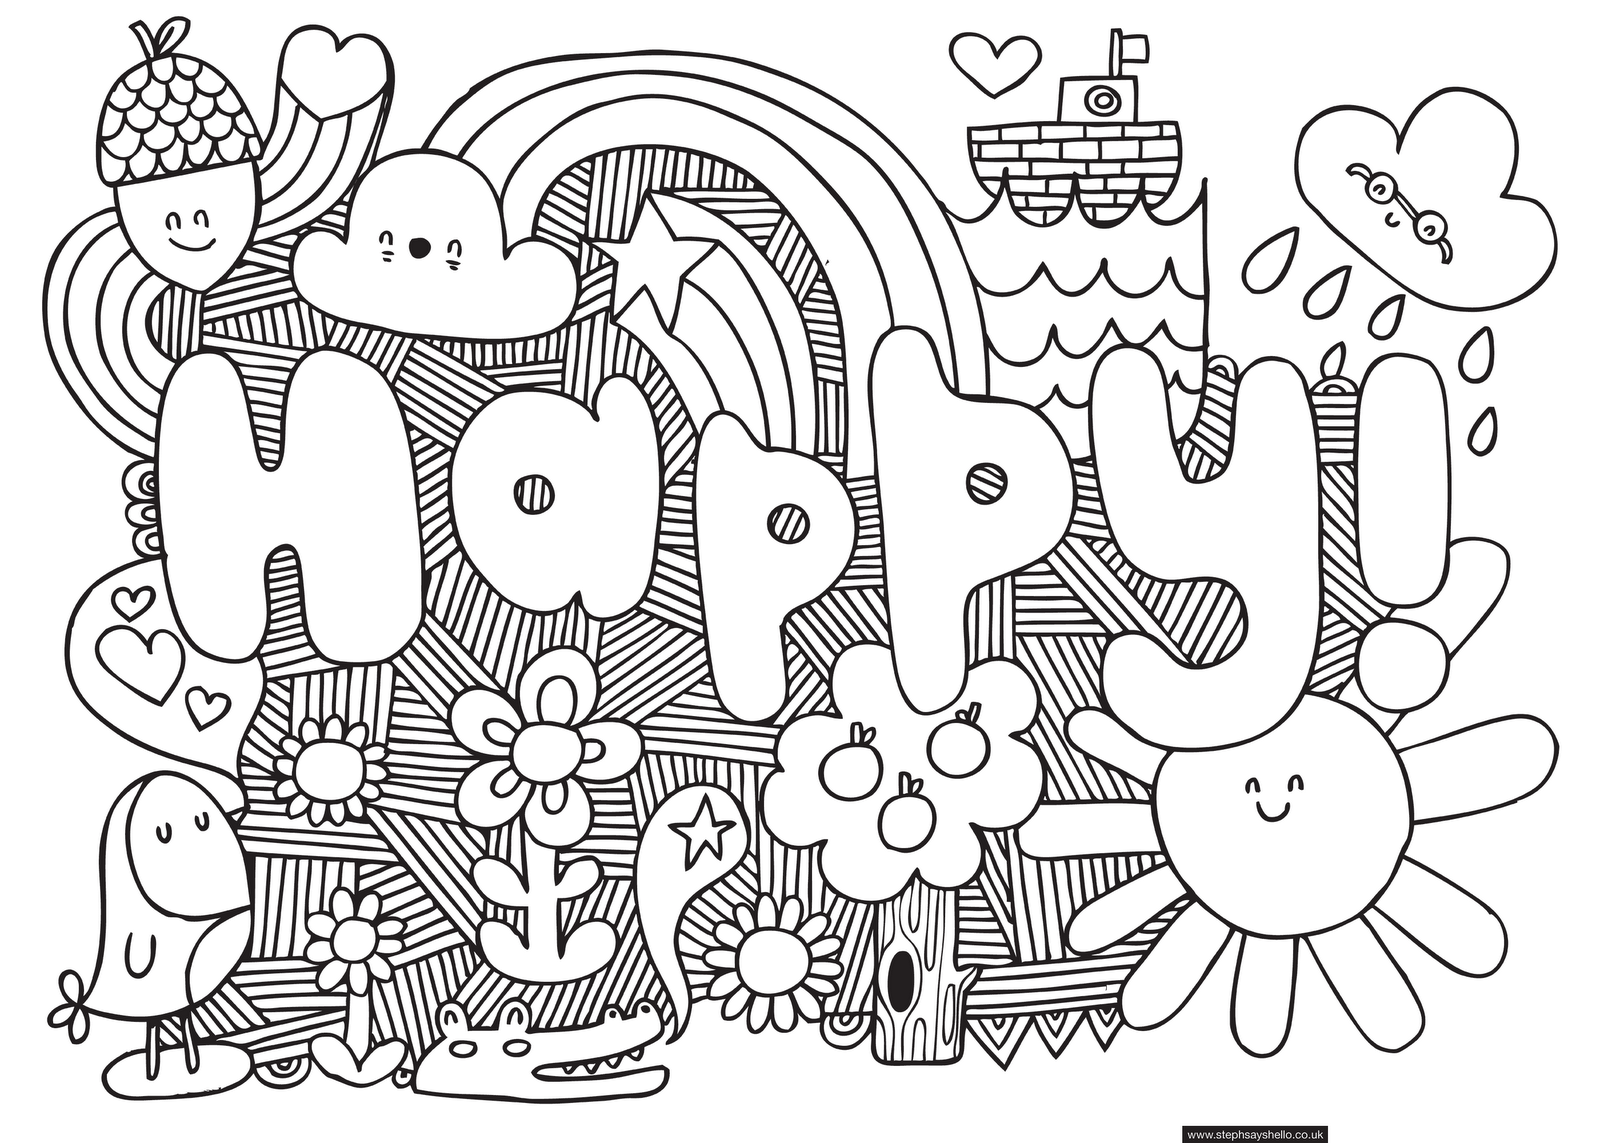 Cool Coloring Pages Elementary Kids - Coloring Home